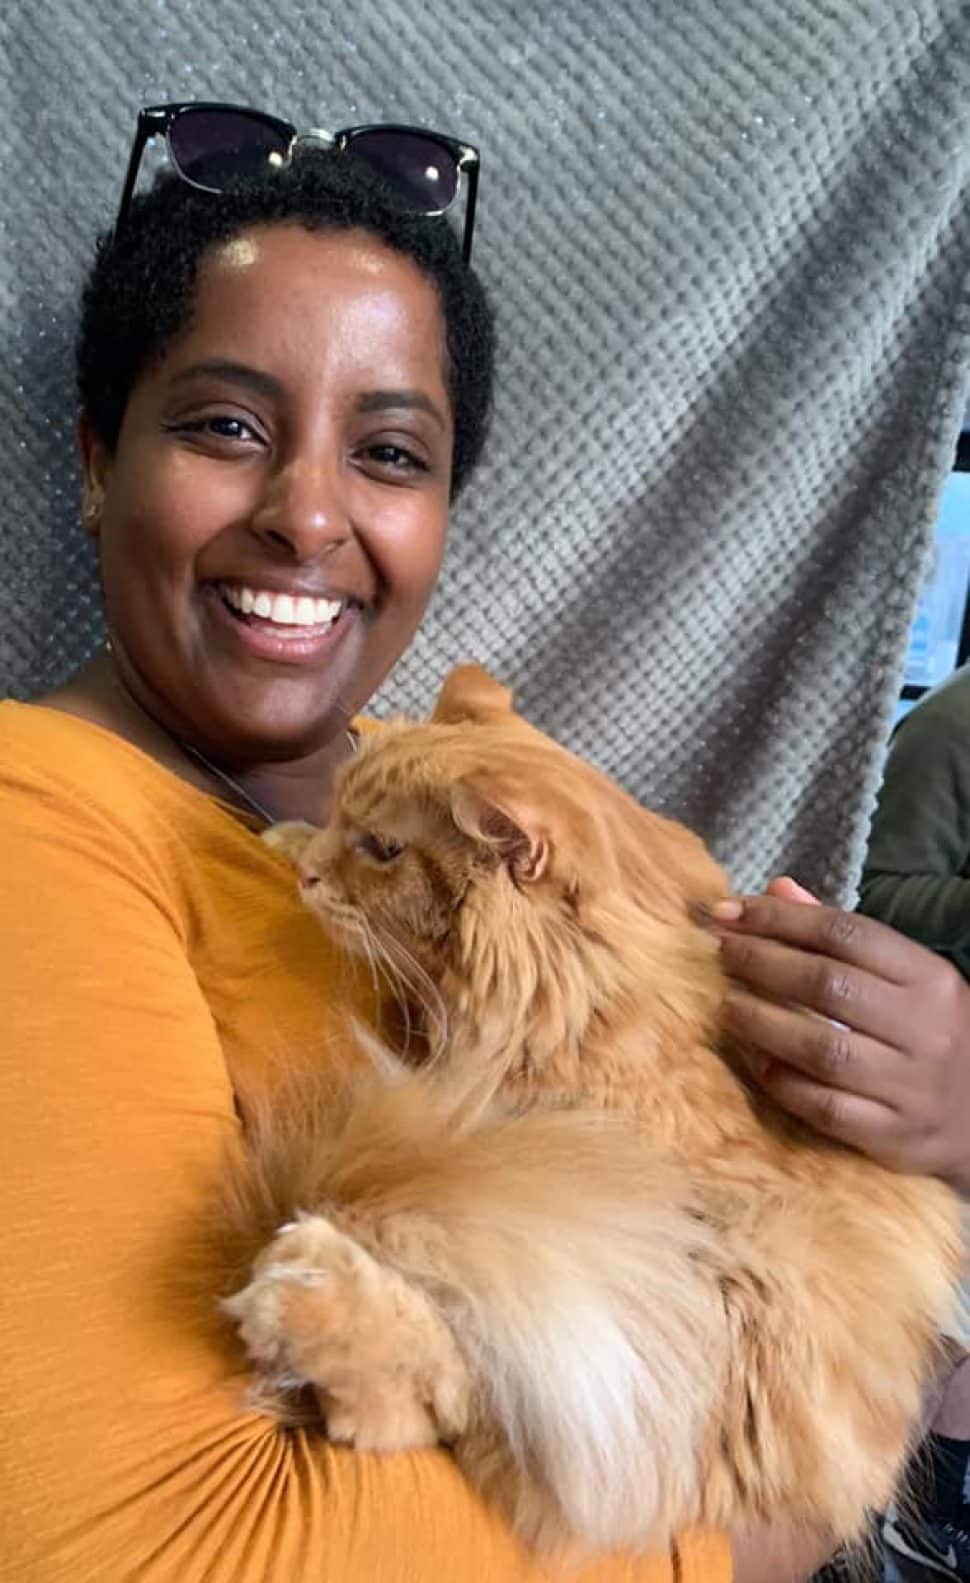 Woman with short black hair and sunglasses on top of her head, wearing a bright-orange shirt, cuddles newly adopted orange cat.